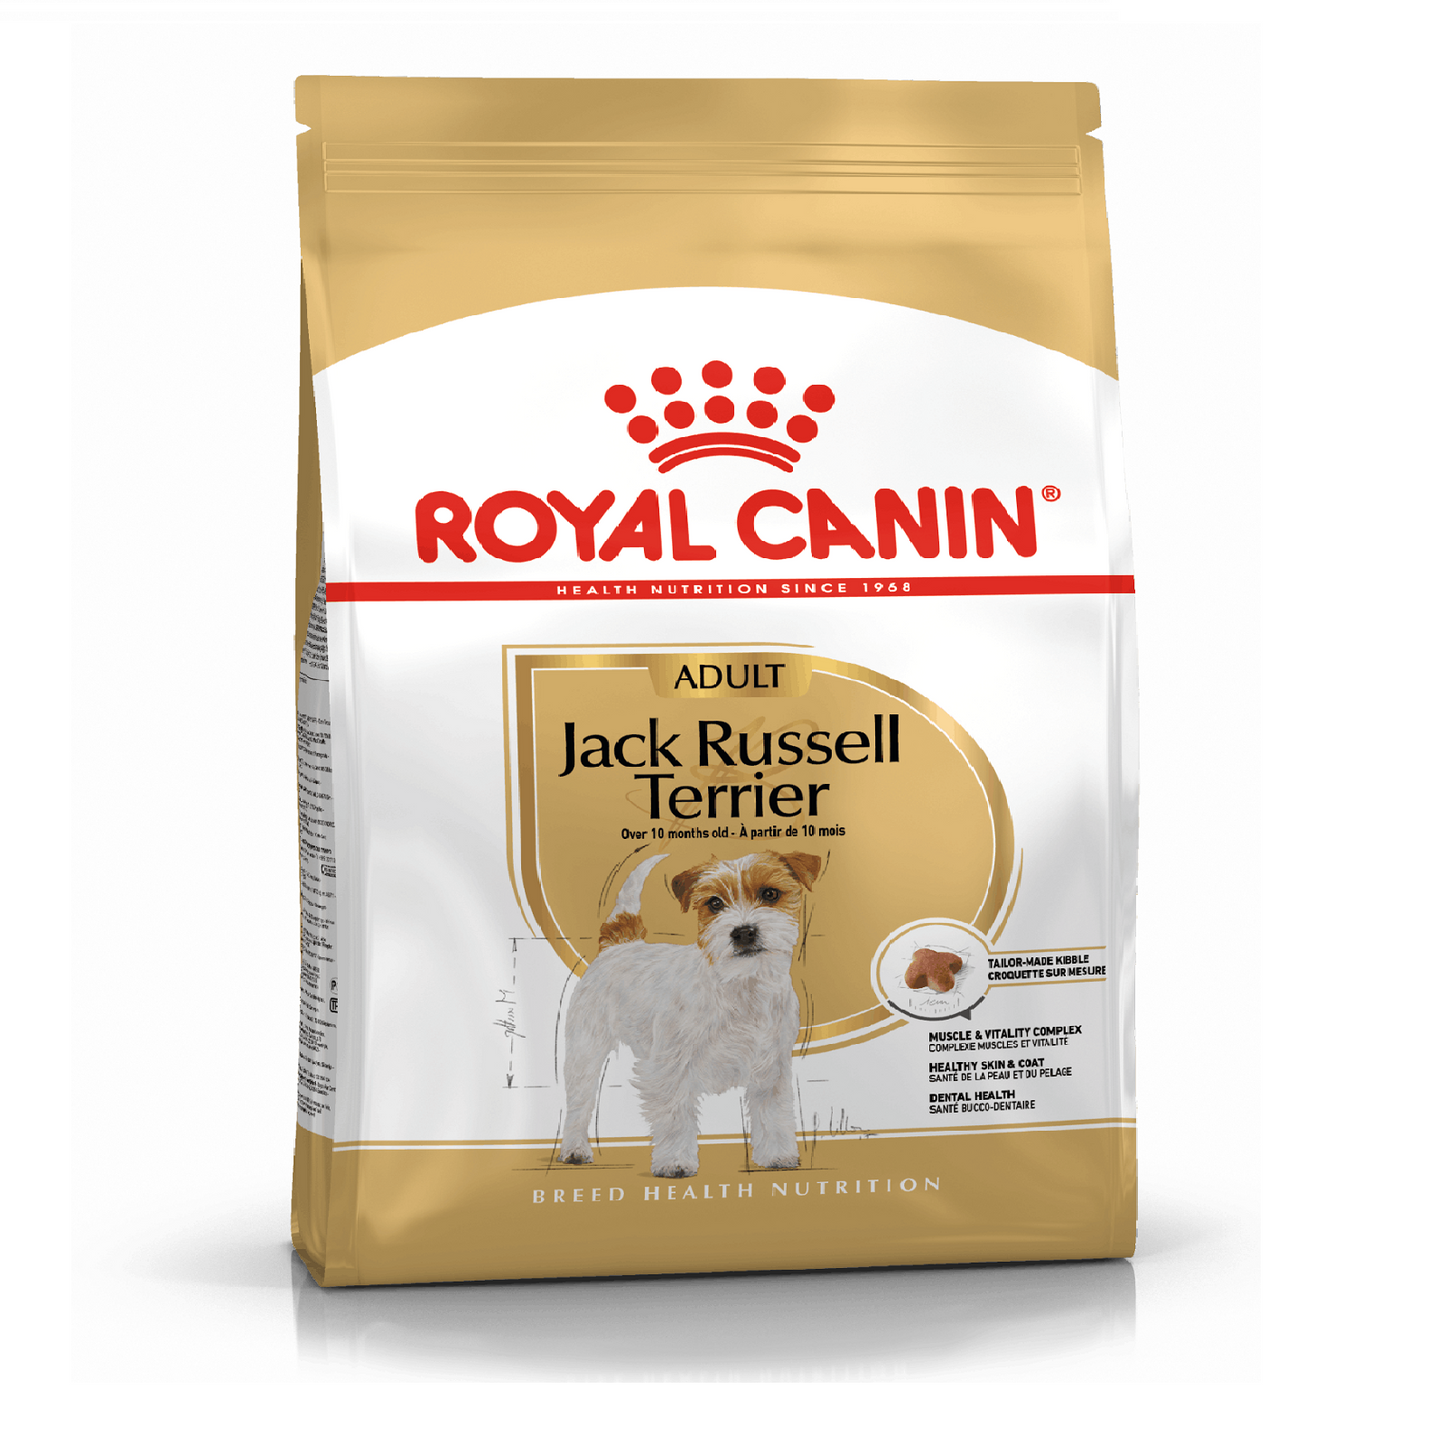 ROYAL CANIN - Jack Russell Terrier Adult